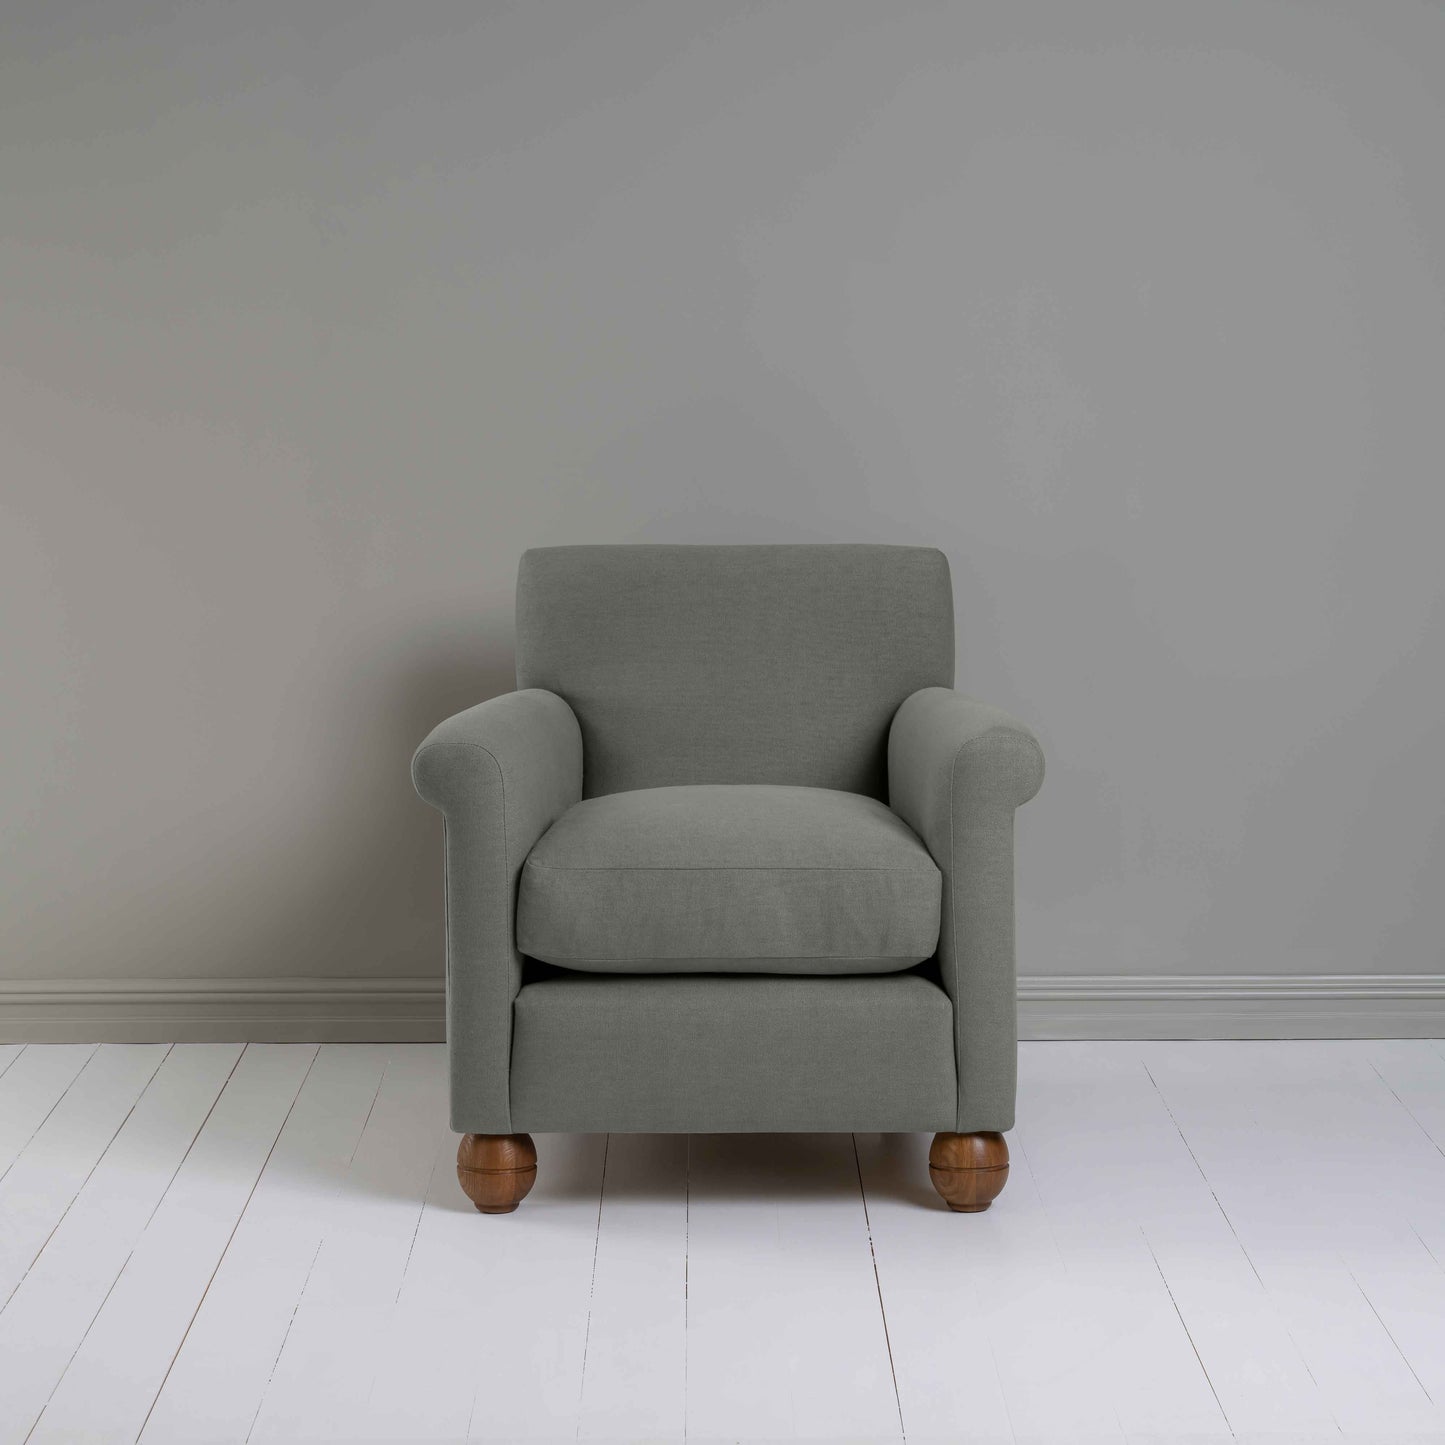 Idler Armchair in Laidback Linen Shadow